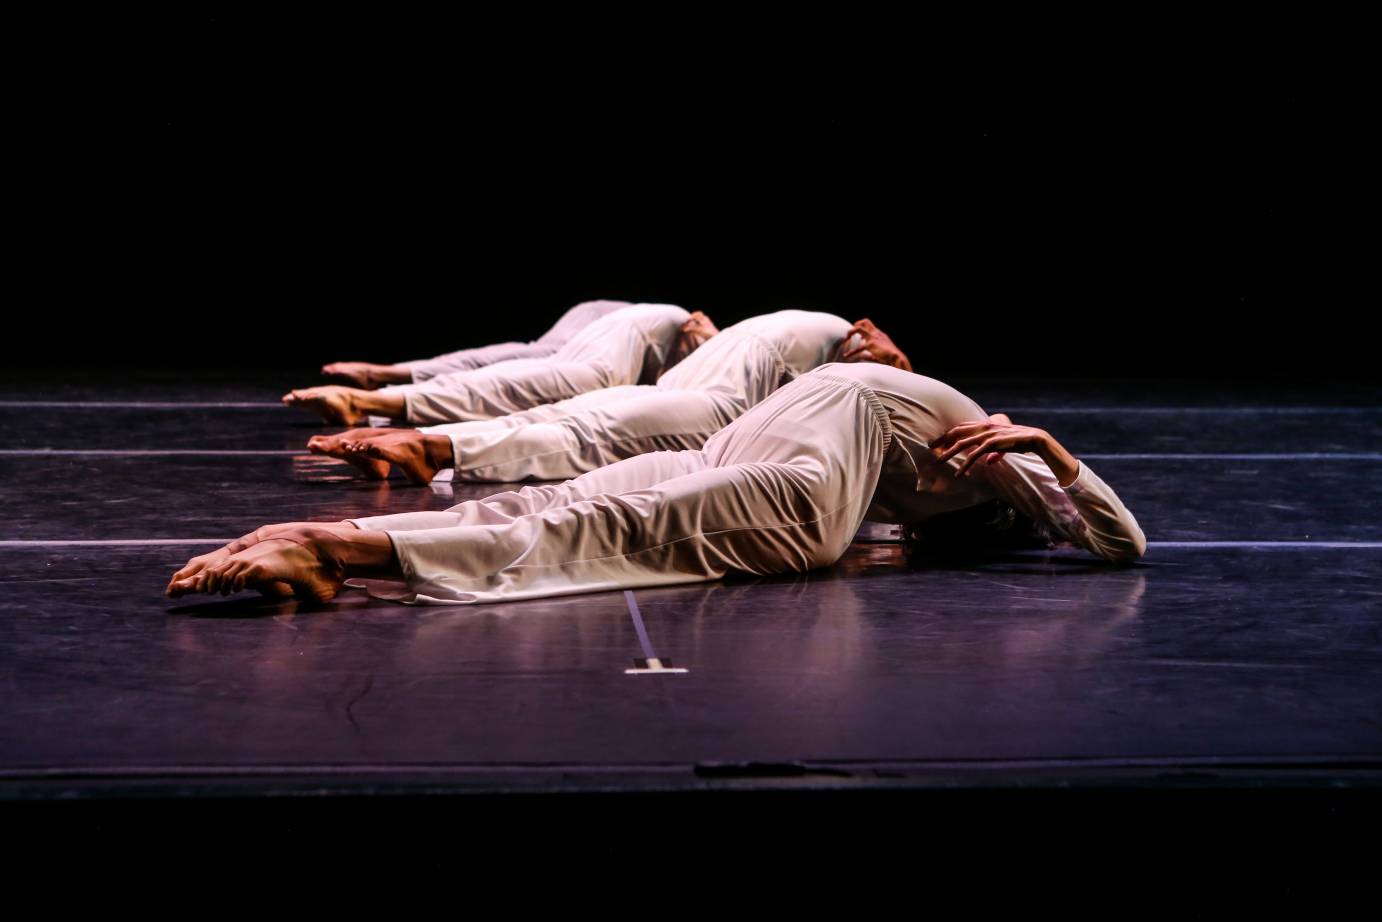 4 Dancers dressed in silky white lie on the black floor and arch their backs